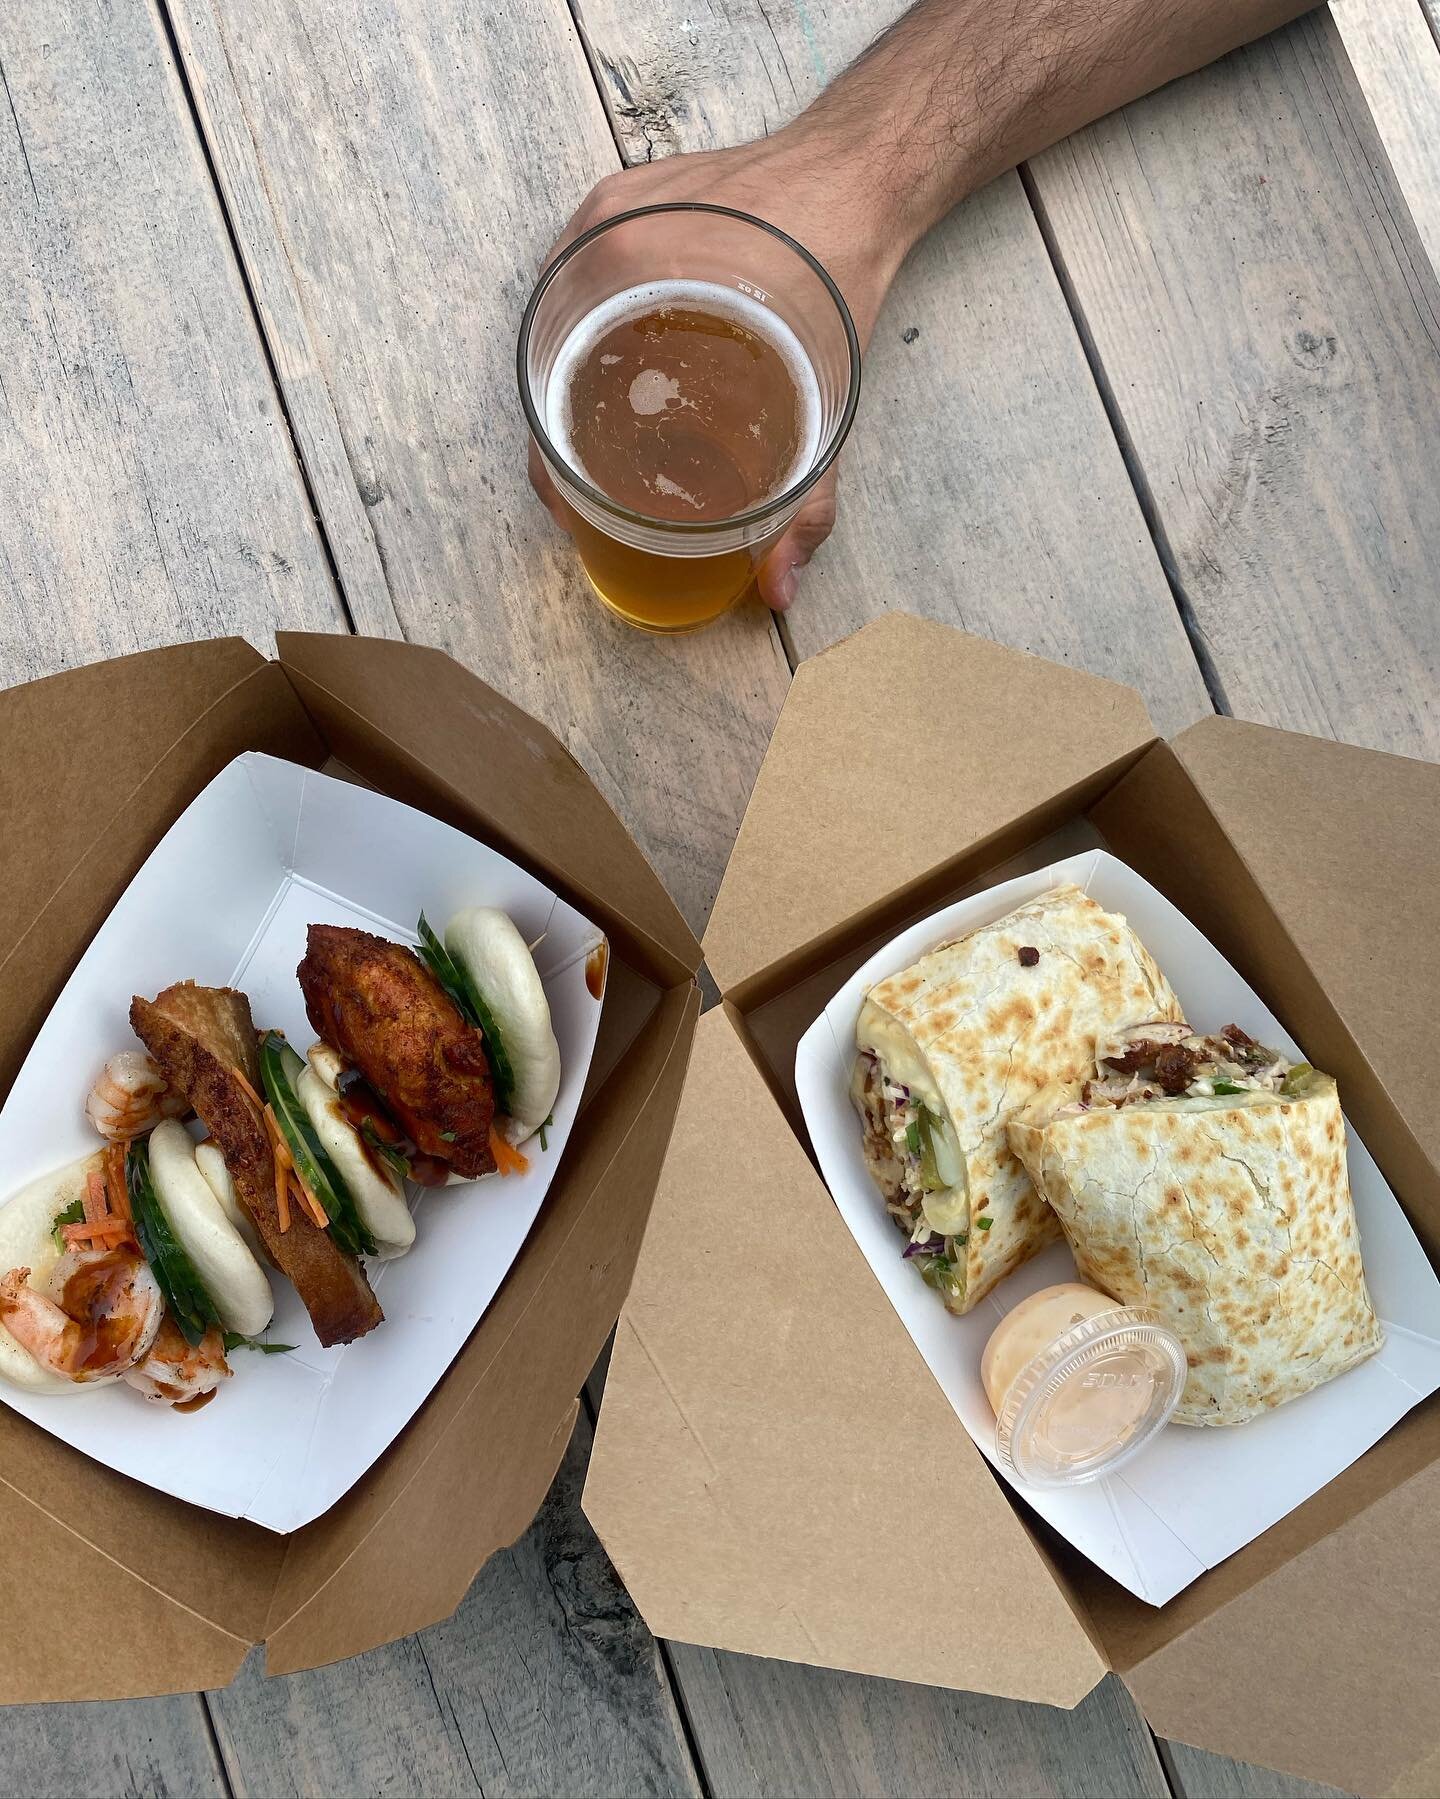 The perfect combo: brews, buns &amp; burritos @ghostmonkeybrew. Full list of must try Charleston breweries is online now #visitcharleston #wetraveledwhere